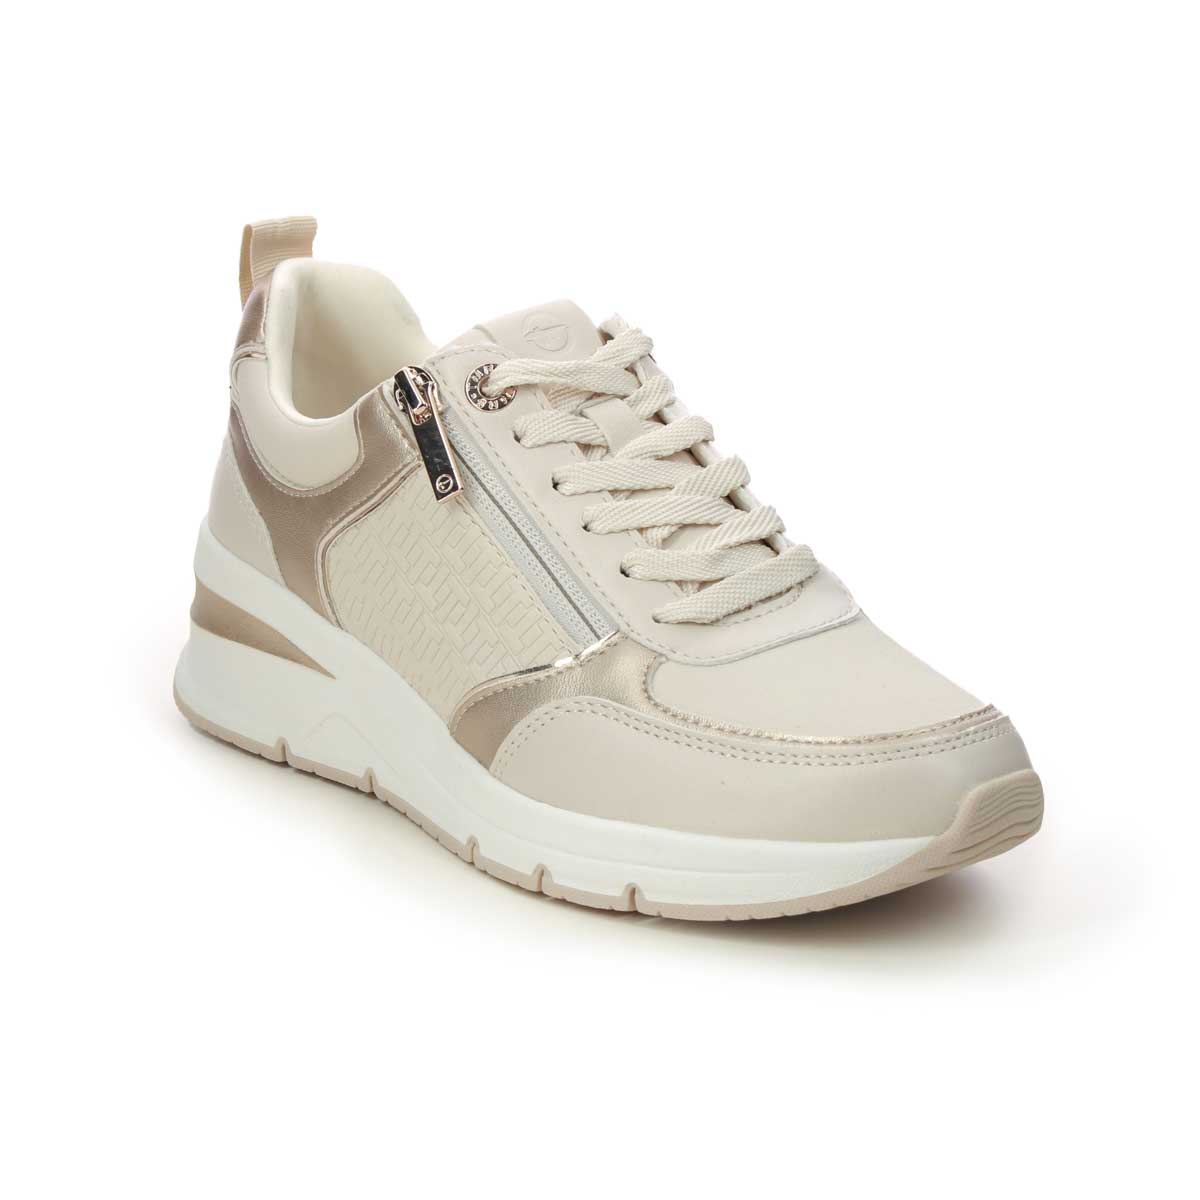 Tamaris Rea Zip Wedge Ivory Womens trainers 23721-42-430 in a Plain Man-made in Size 41